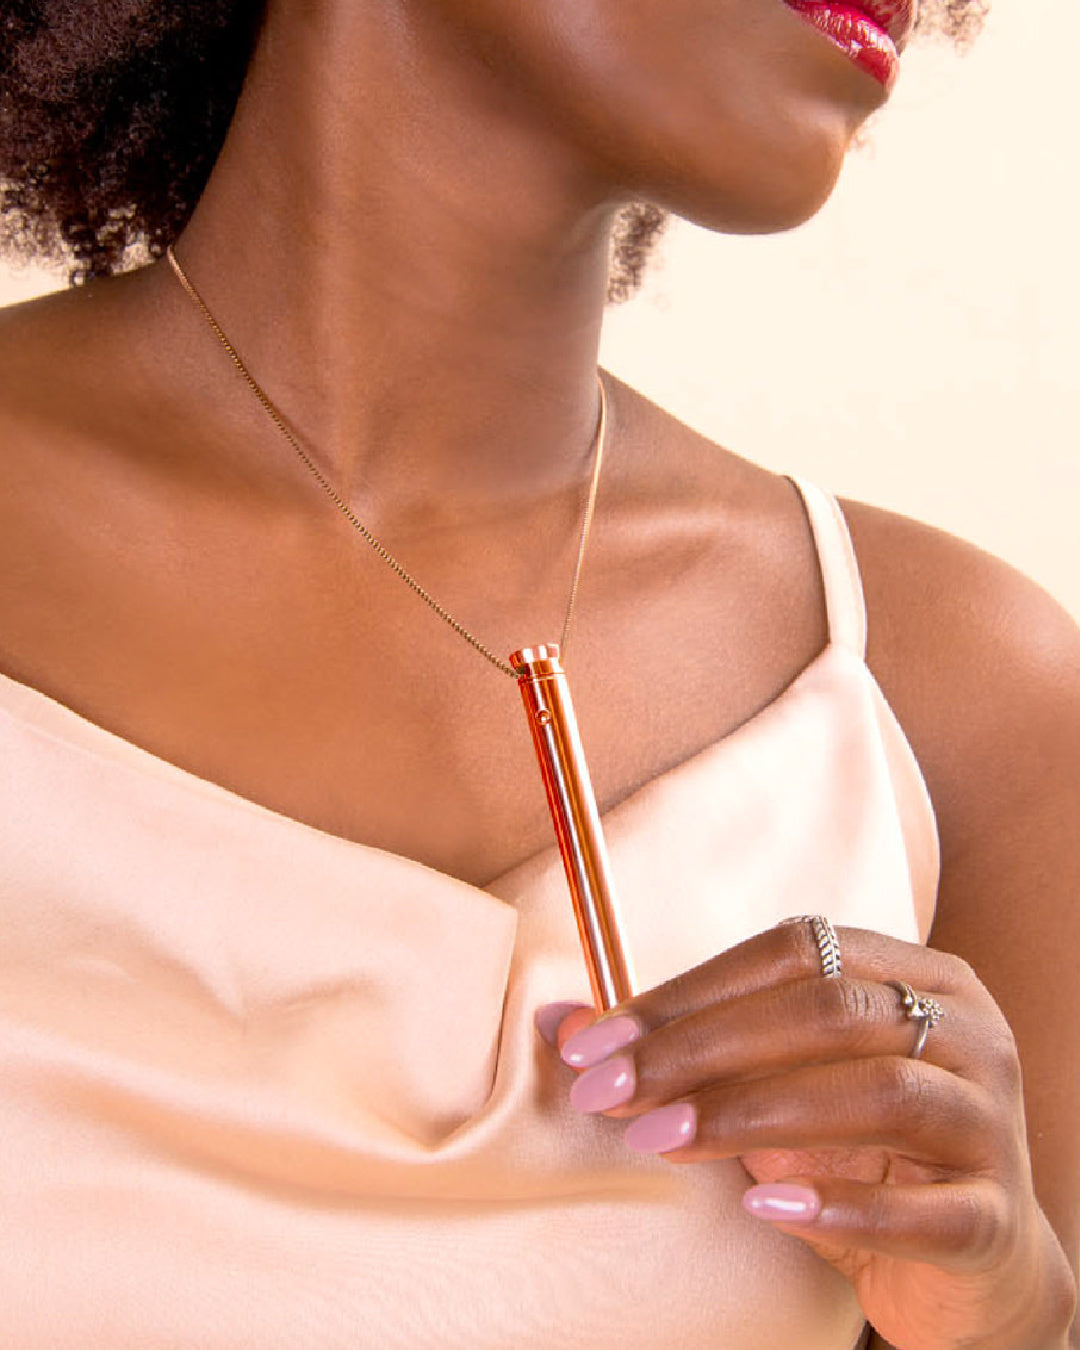 Le Wand Discreet Rechargeable Vibrating Necklace - Rose Gold